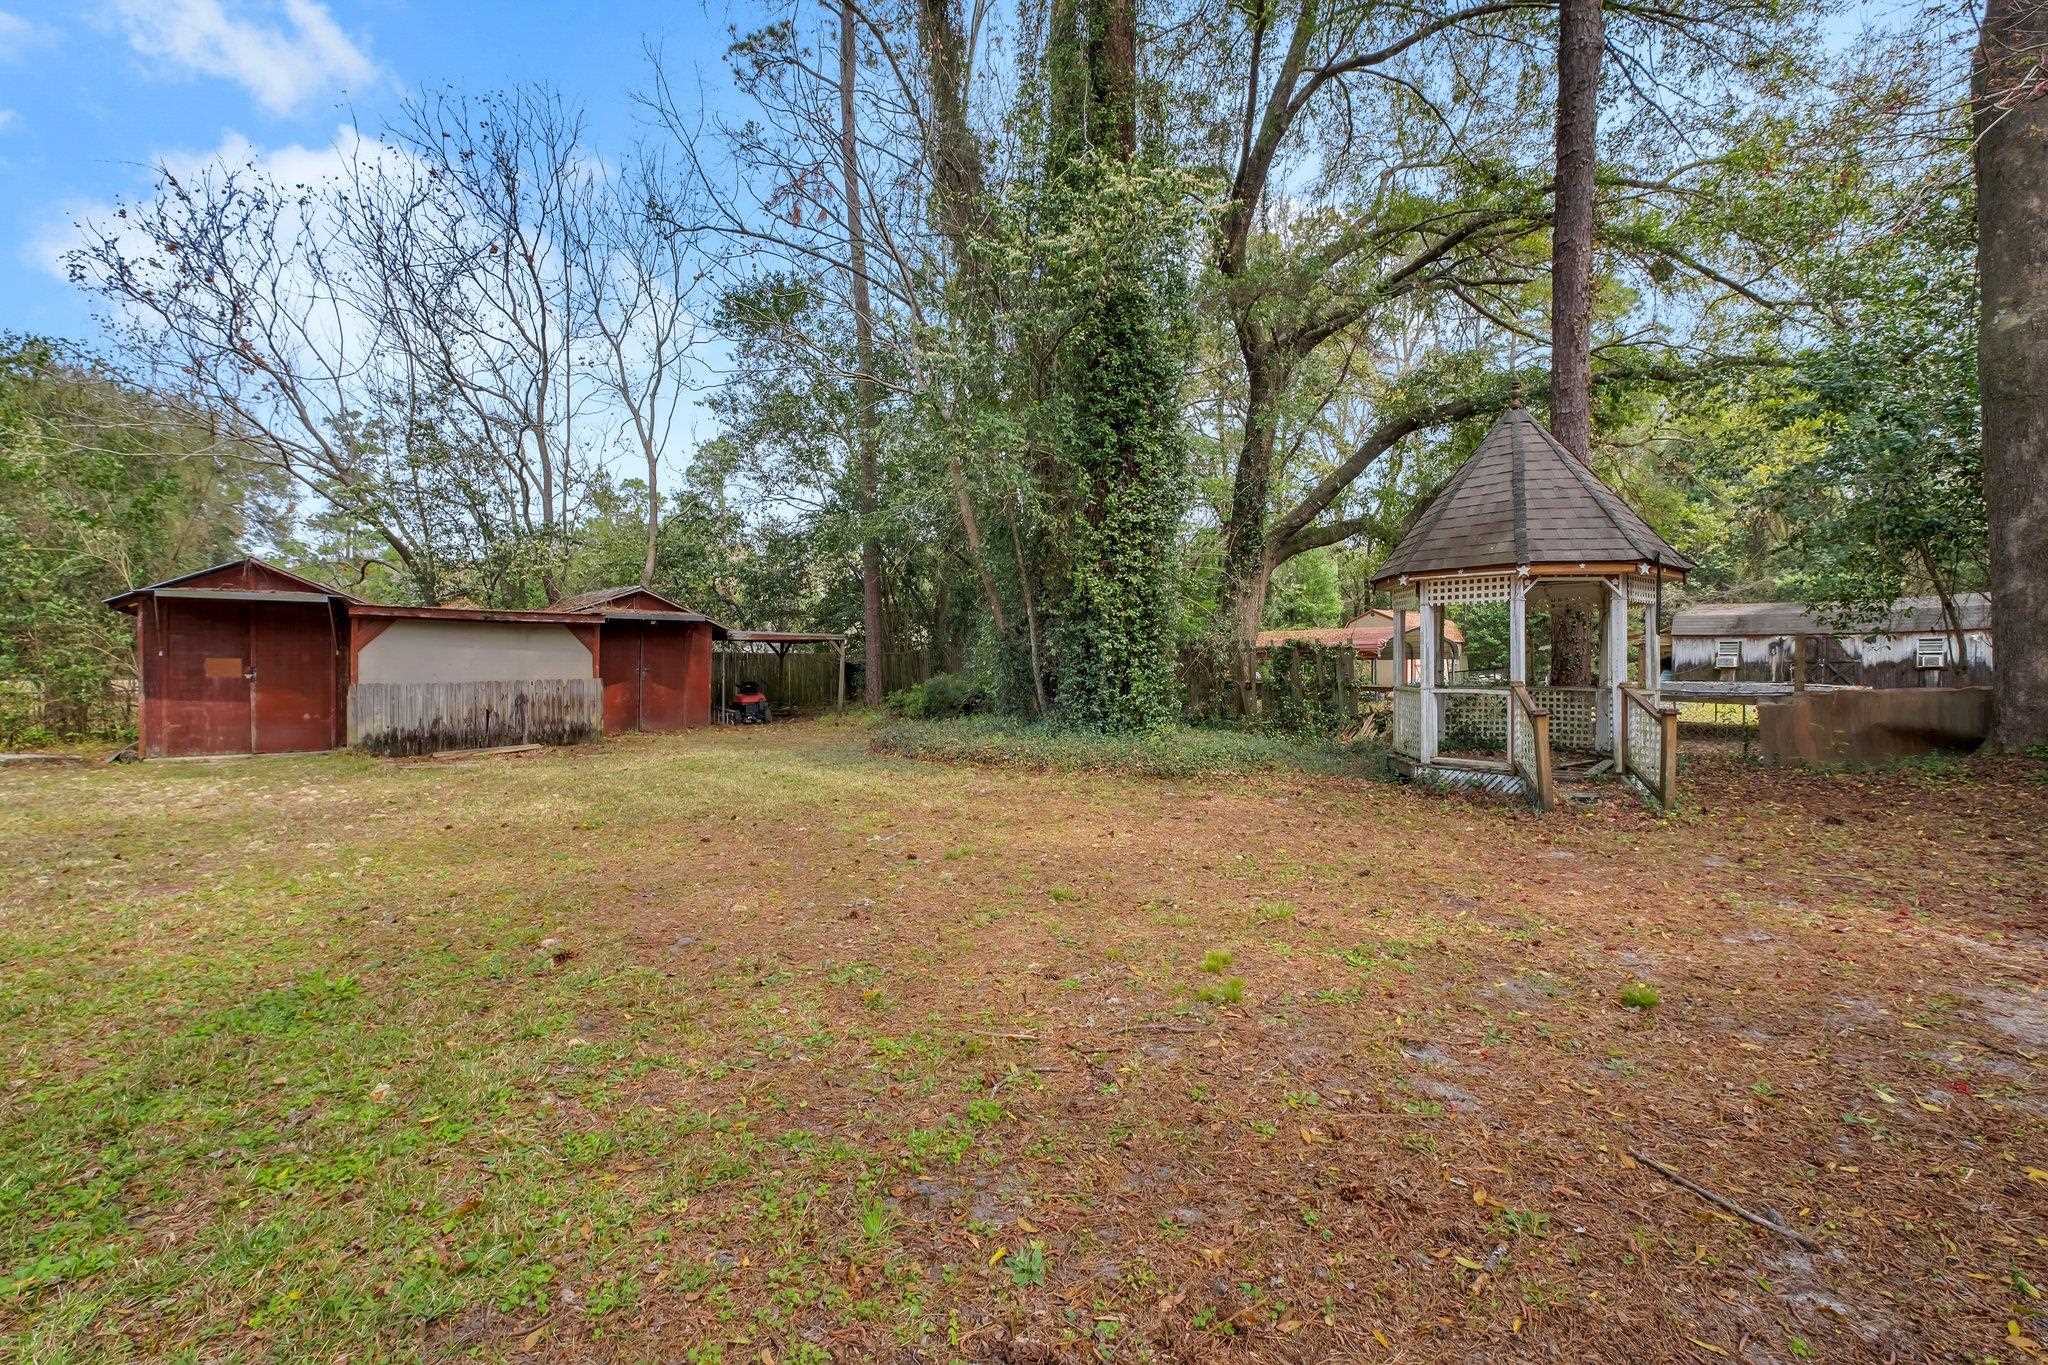 2040 Page Road,TALLAHASSEE,Florida 32305,3 Bedrooms Bedrooms,2 BathroomsBathrooms,Detached single family,2040 Page Road,369264